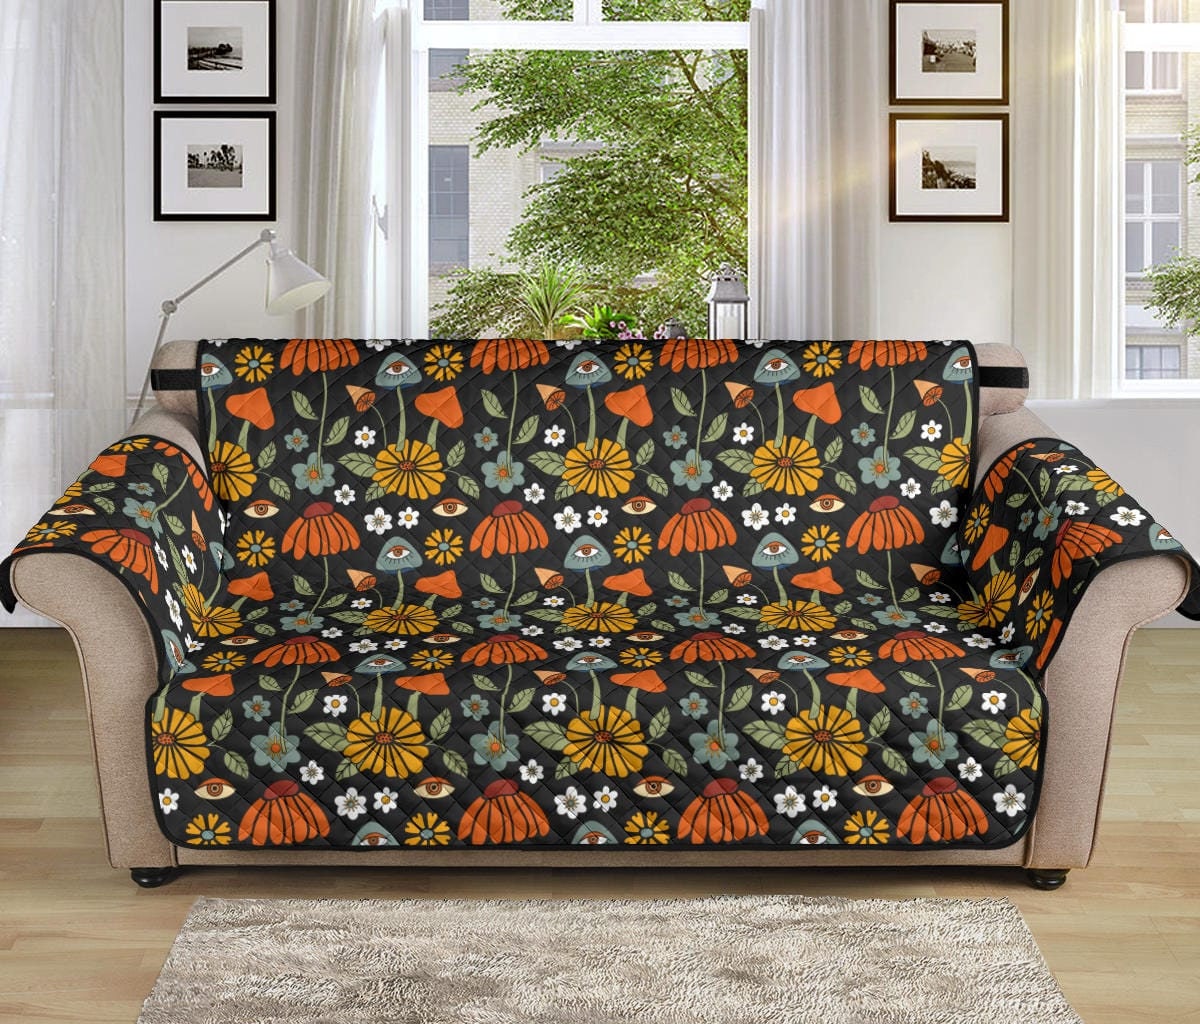 Hippie Mushroom Print Sofa Cover, Quilted Couch Cover, Lounge Pet  Protector, Recliner Chair Cover, Slip Cover Retro, XL Couch Sofa Cover 